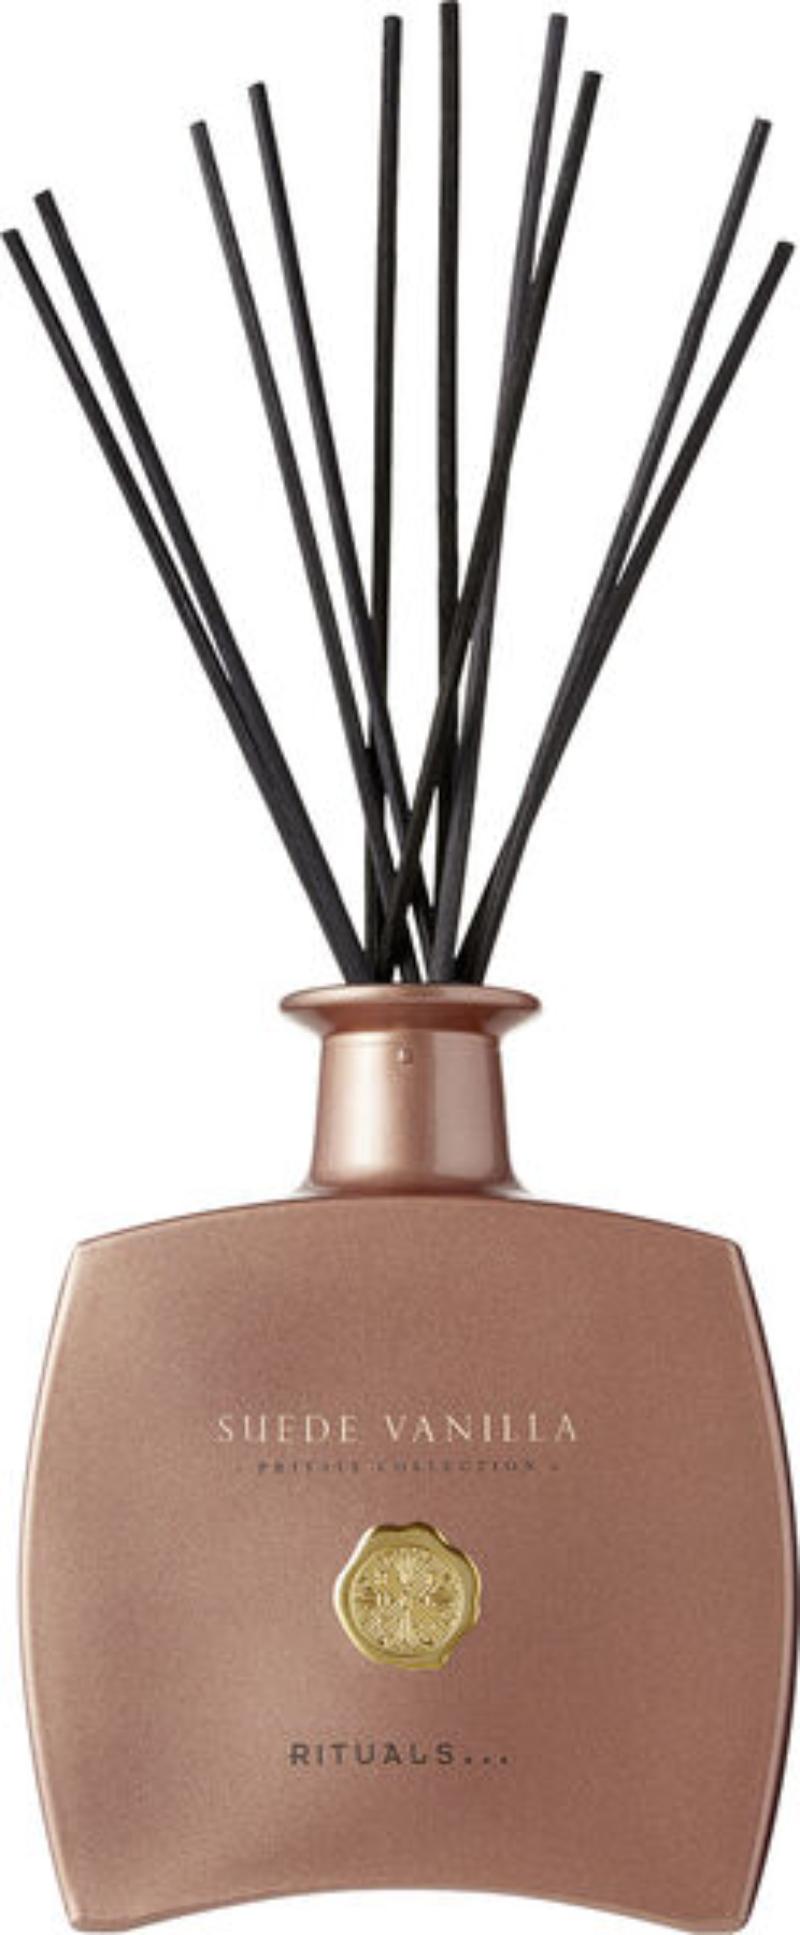 Buy Rituals Suede Vanilla Fragrance Sticks from the Next UK online shop